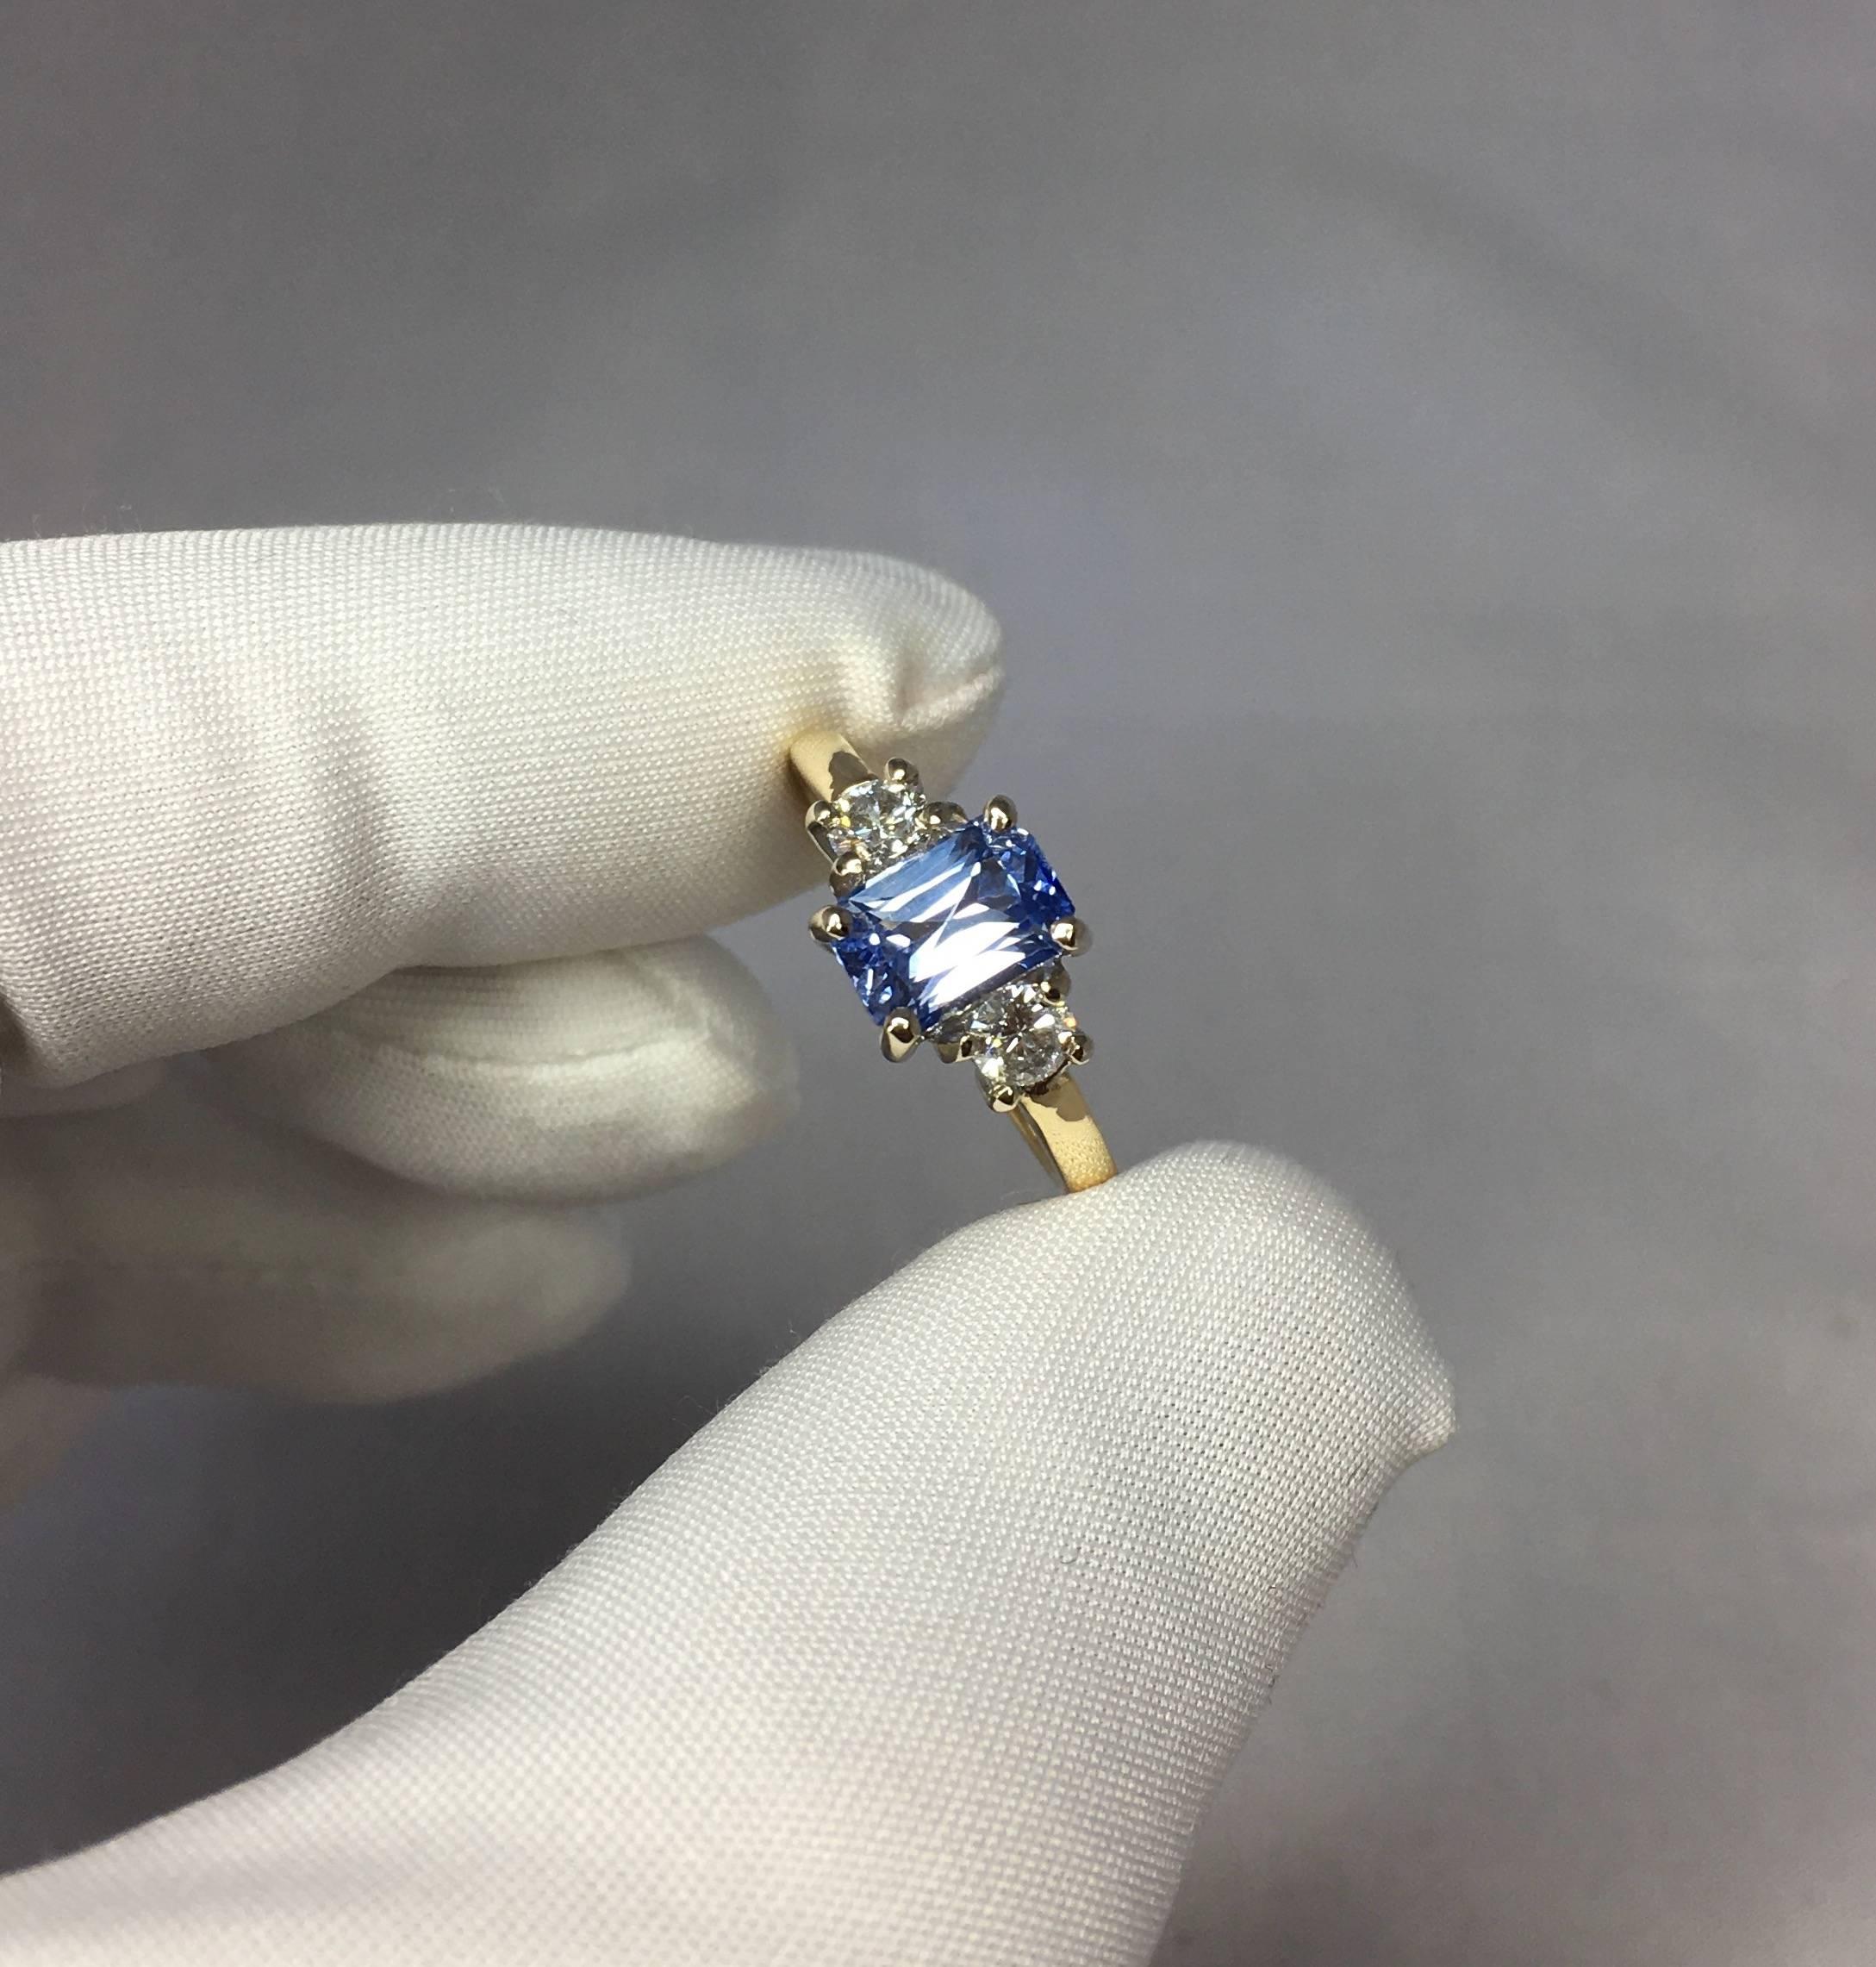 Stunning natural light blue Ceylon sapphire set in a fine 18k gold ring. 2 tone setting with white gold claws and a yellow gold band.

Good size 1.56 carat centre sapphire with a fine and very unique light blue colour and excellent clarity.